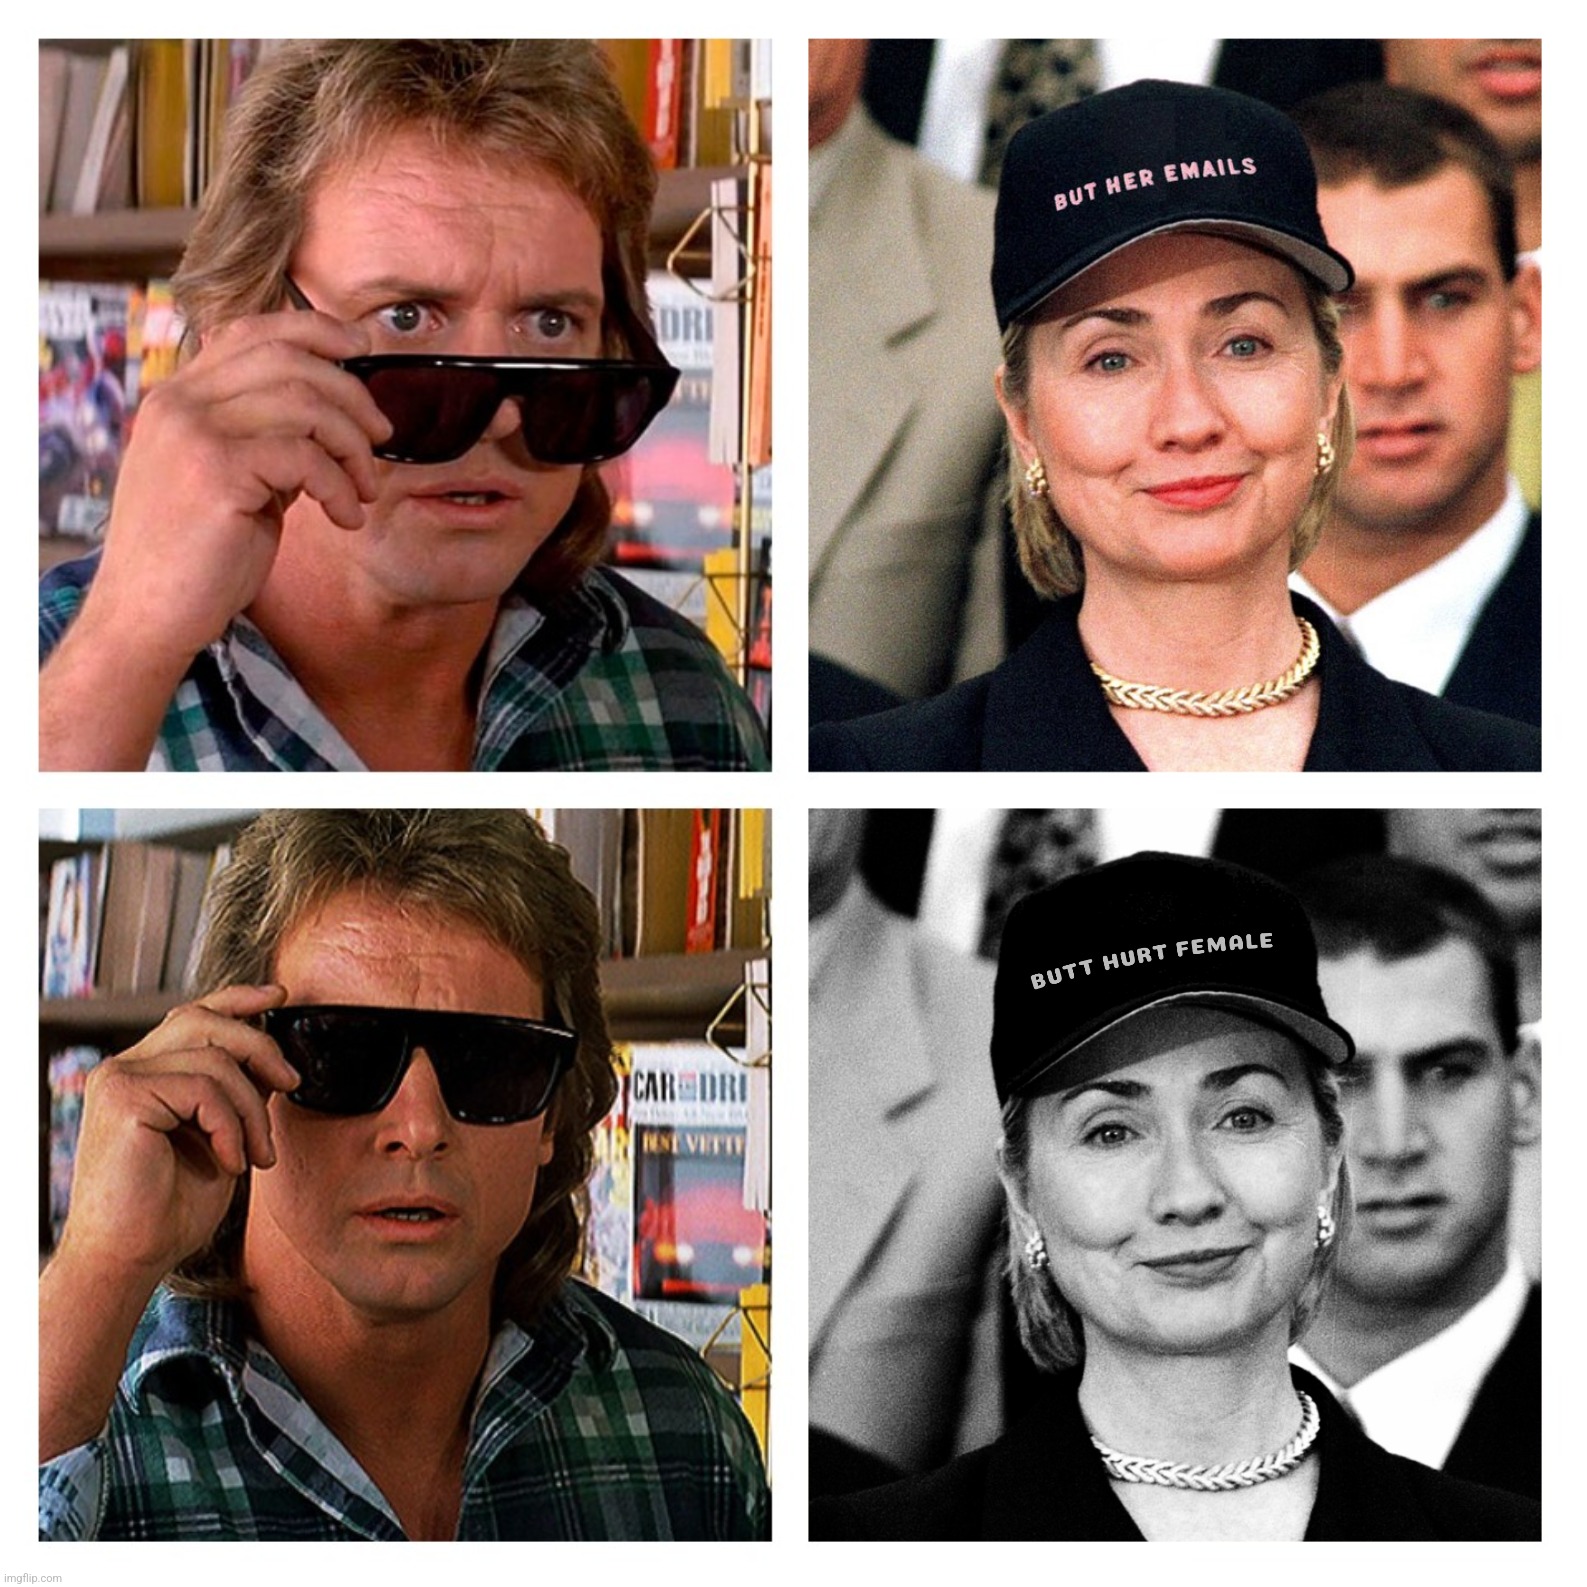 Bad Photoshop Sunday presents:  Still crazy after all these years | image tagged in bad photoshop sunday,hillary clinton,they live,but her emails,butt hurt female | made w/ Imgflip meme maker